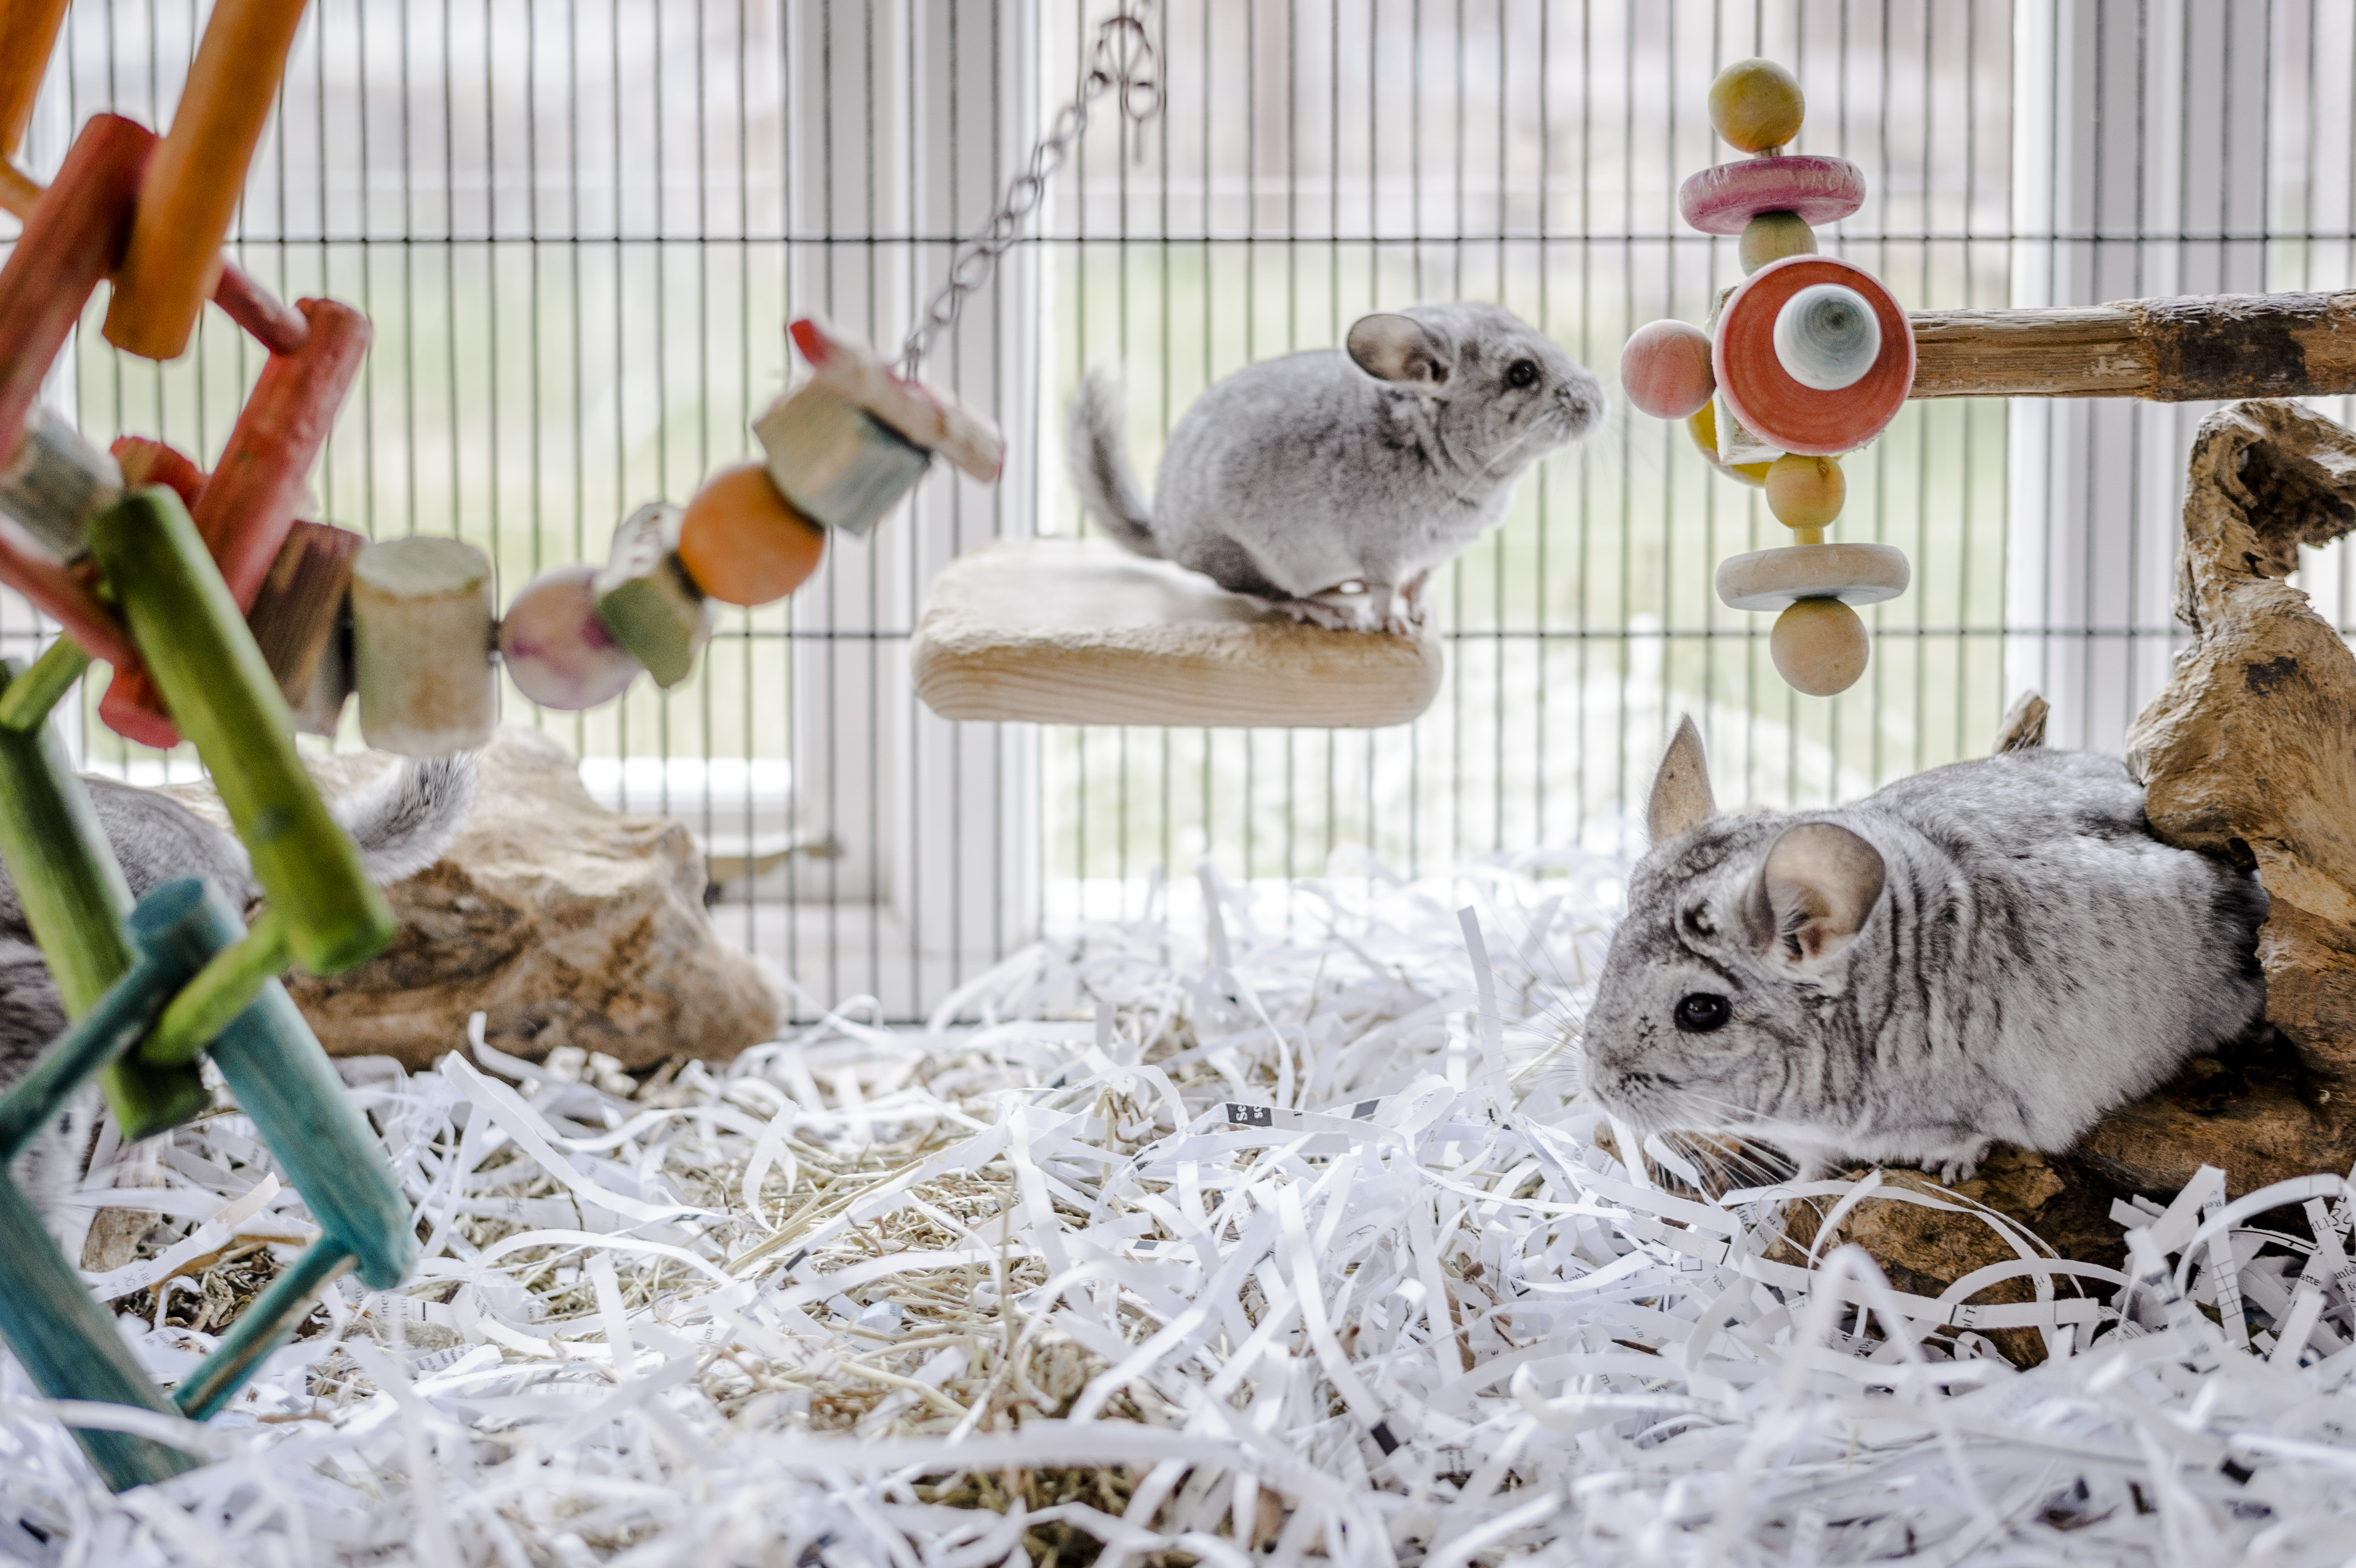 Two grey chinchillas explore their accommodation and toys.